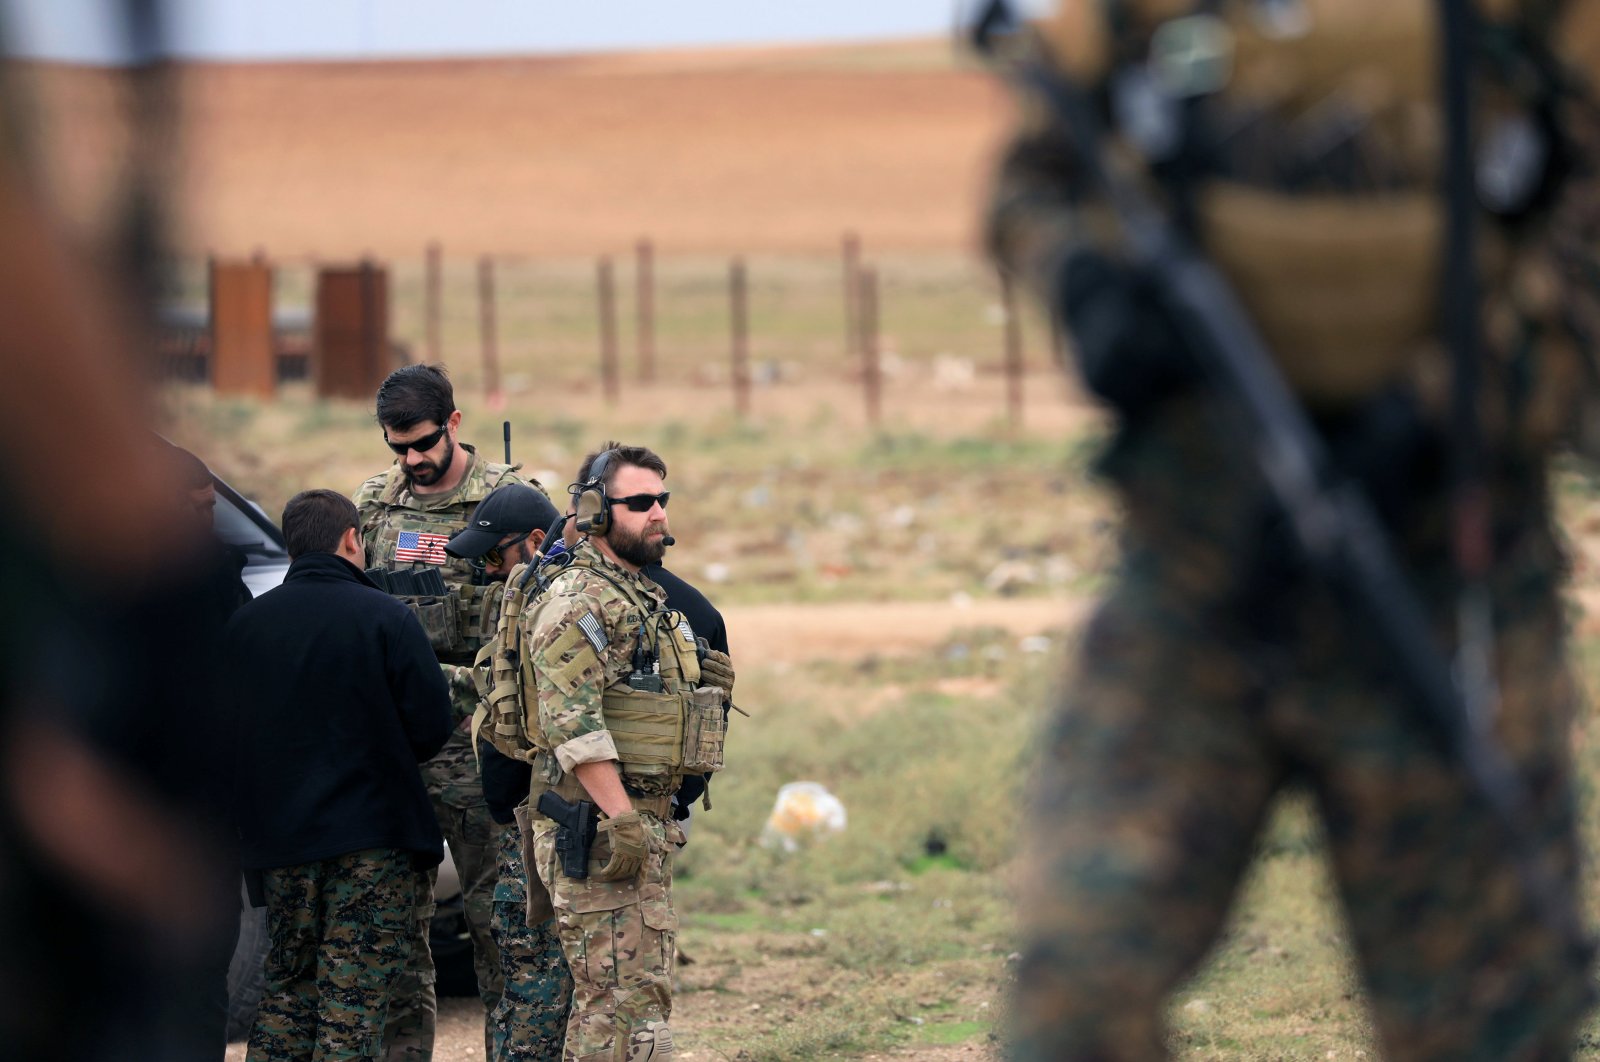 Members of the YPG and U.S. troops are seen during a patrol near the Turkish border in Syria's Hasakah province, Nov.4, 2018. (REUTERS)